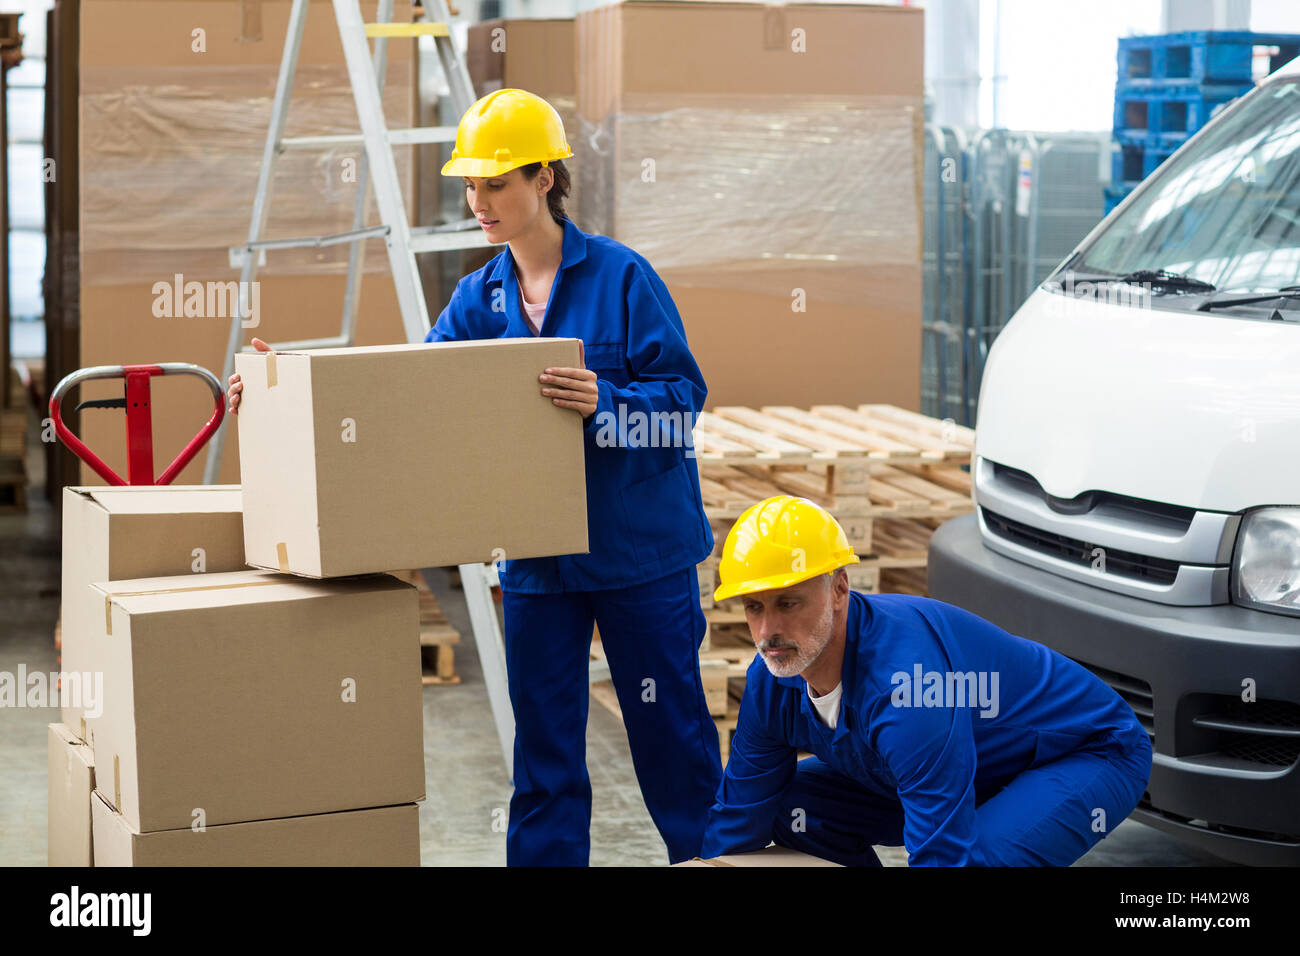 Delivery workers unloading cardboard boxes from pallet jack Stock Photo